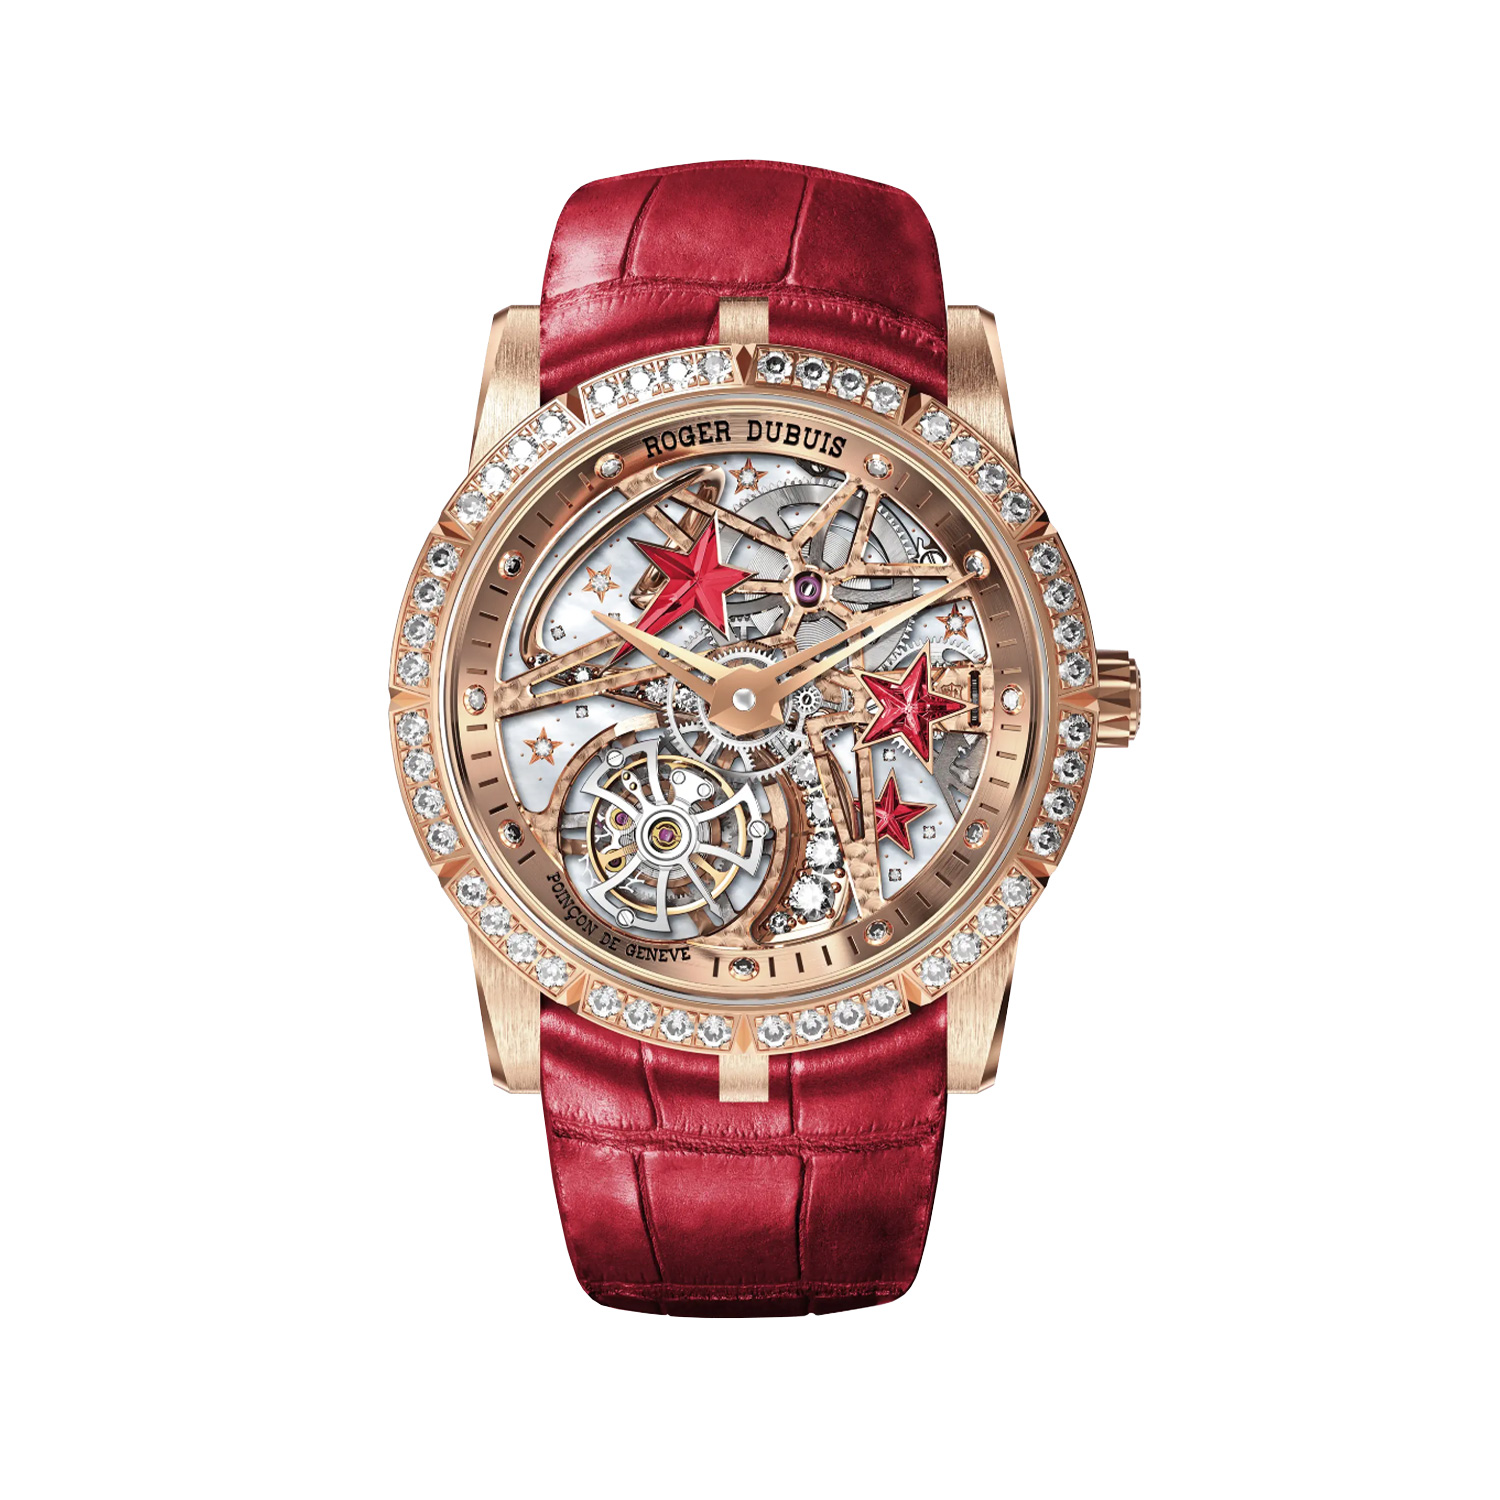 Montre excalibur shooting star pink gold 36mm - Roger Dubuis